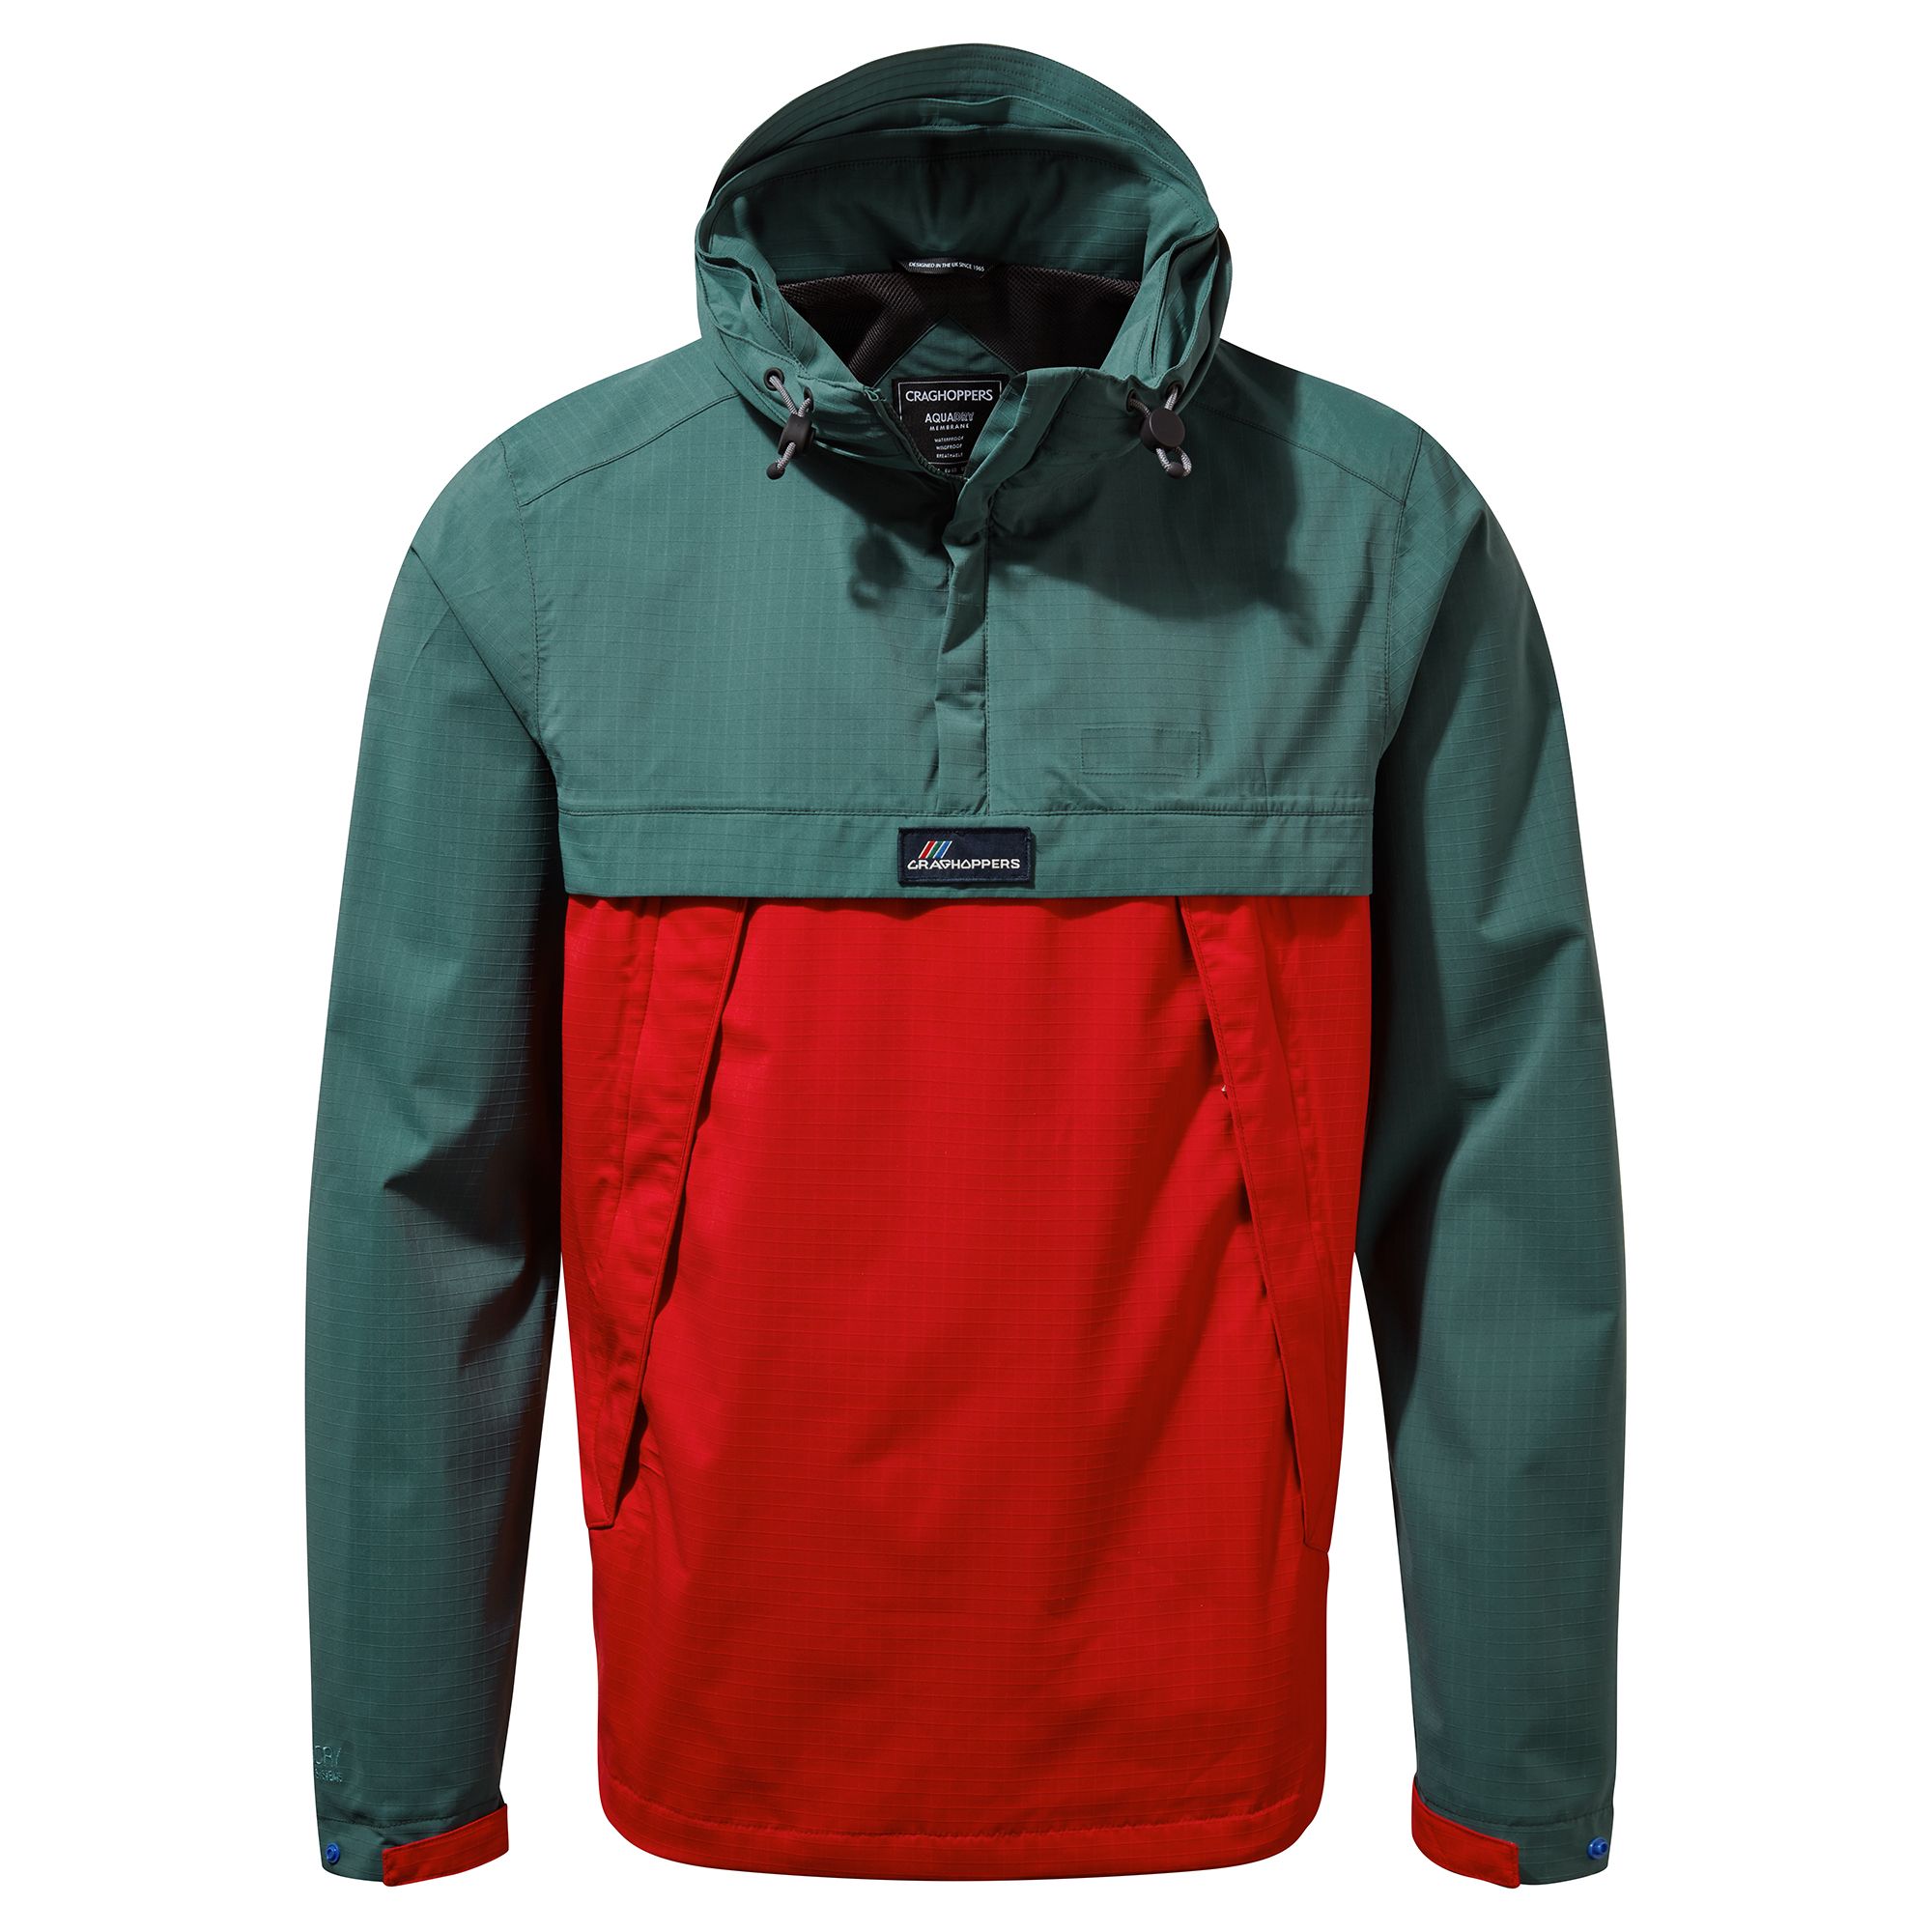 craghoppers-anderson-jacket